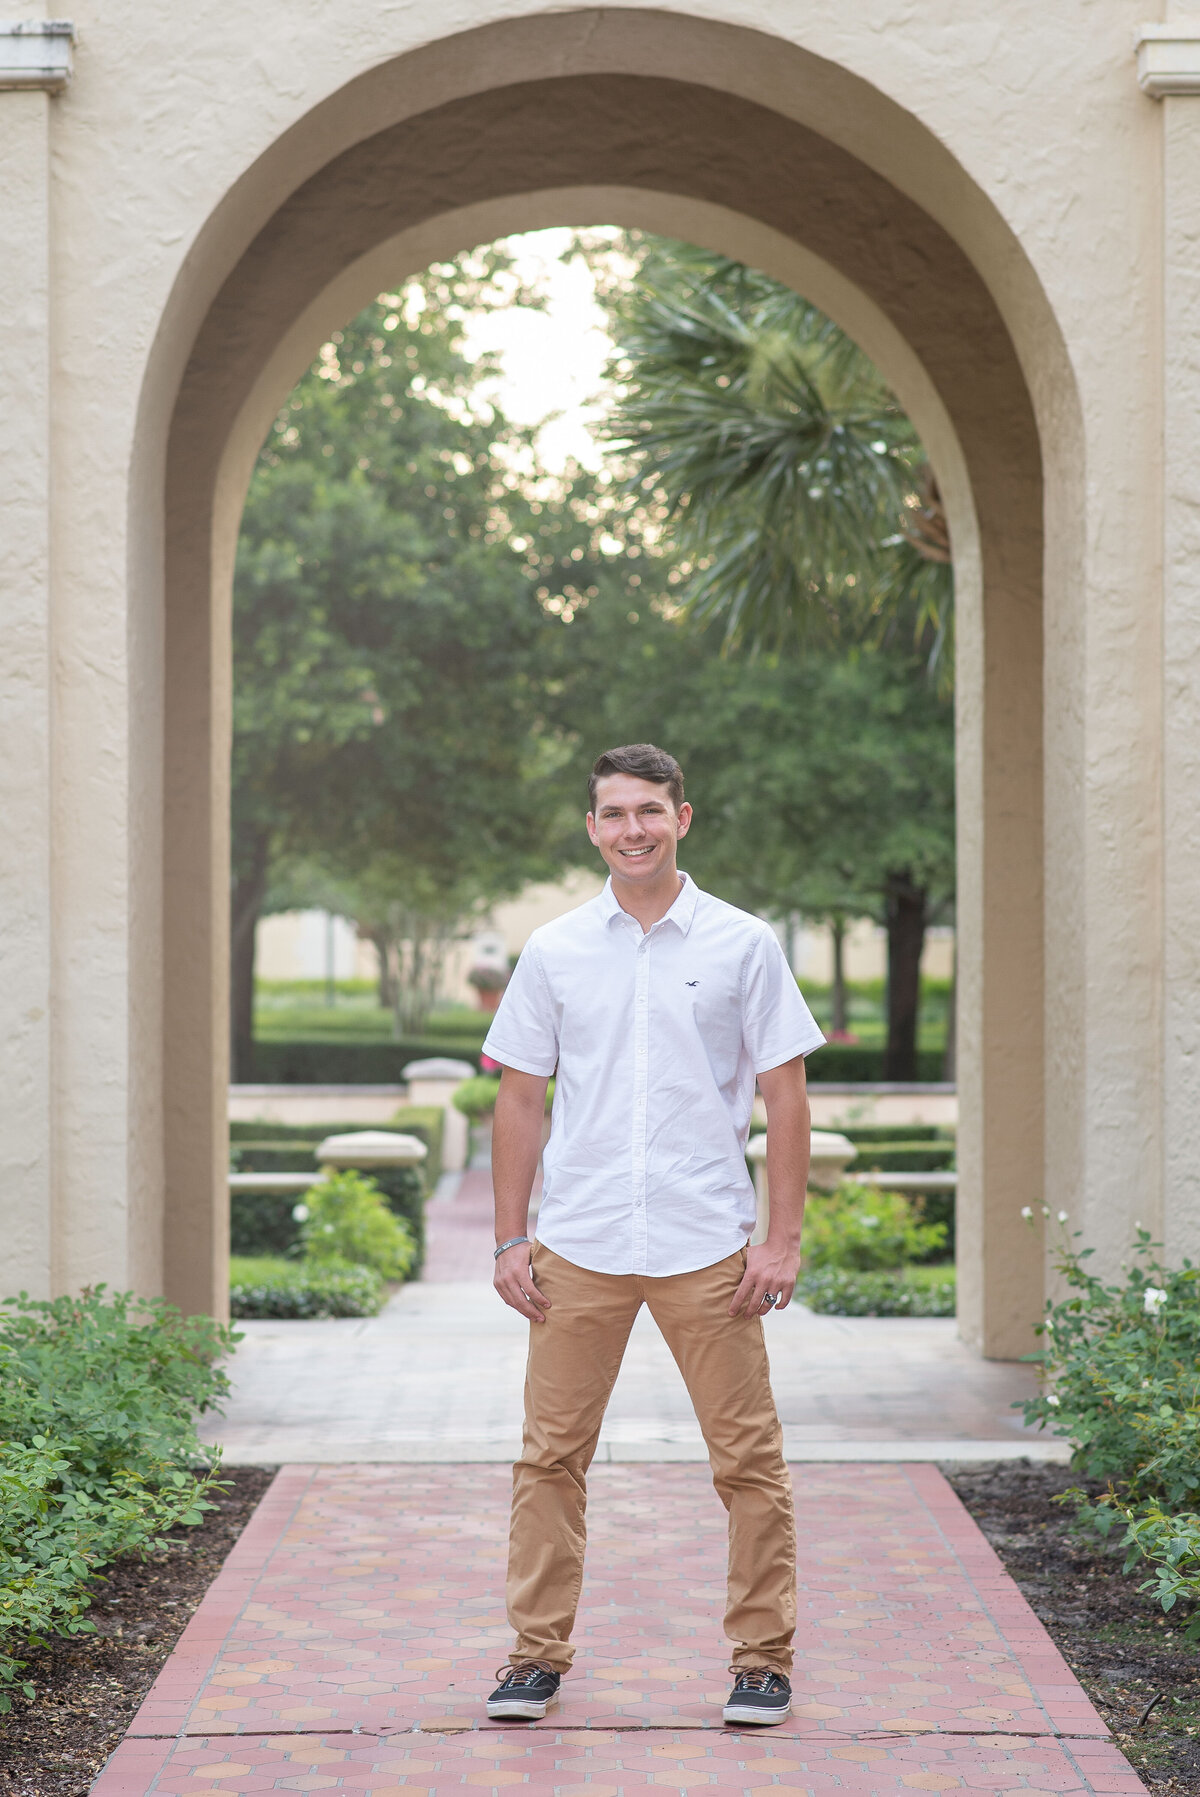 High school senior boy standing on a path in front of a large stone archway smiles at the camera.